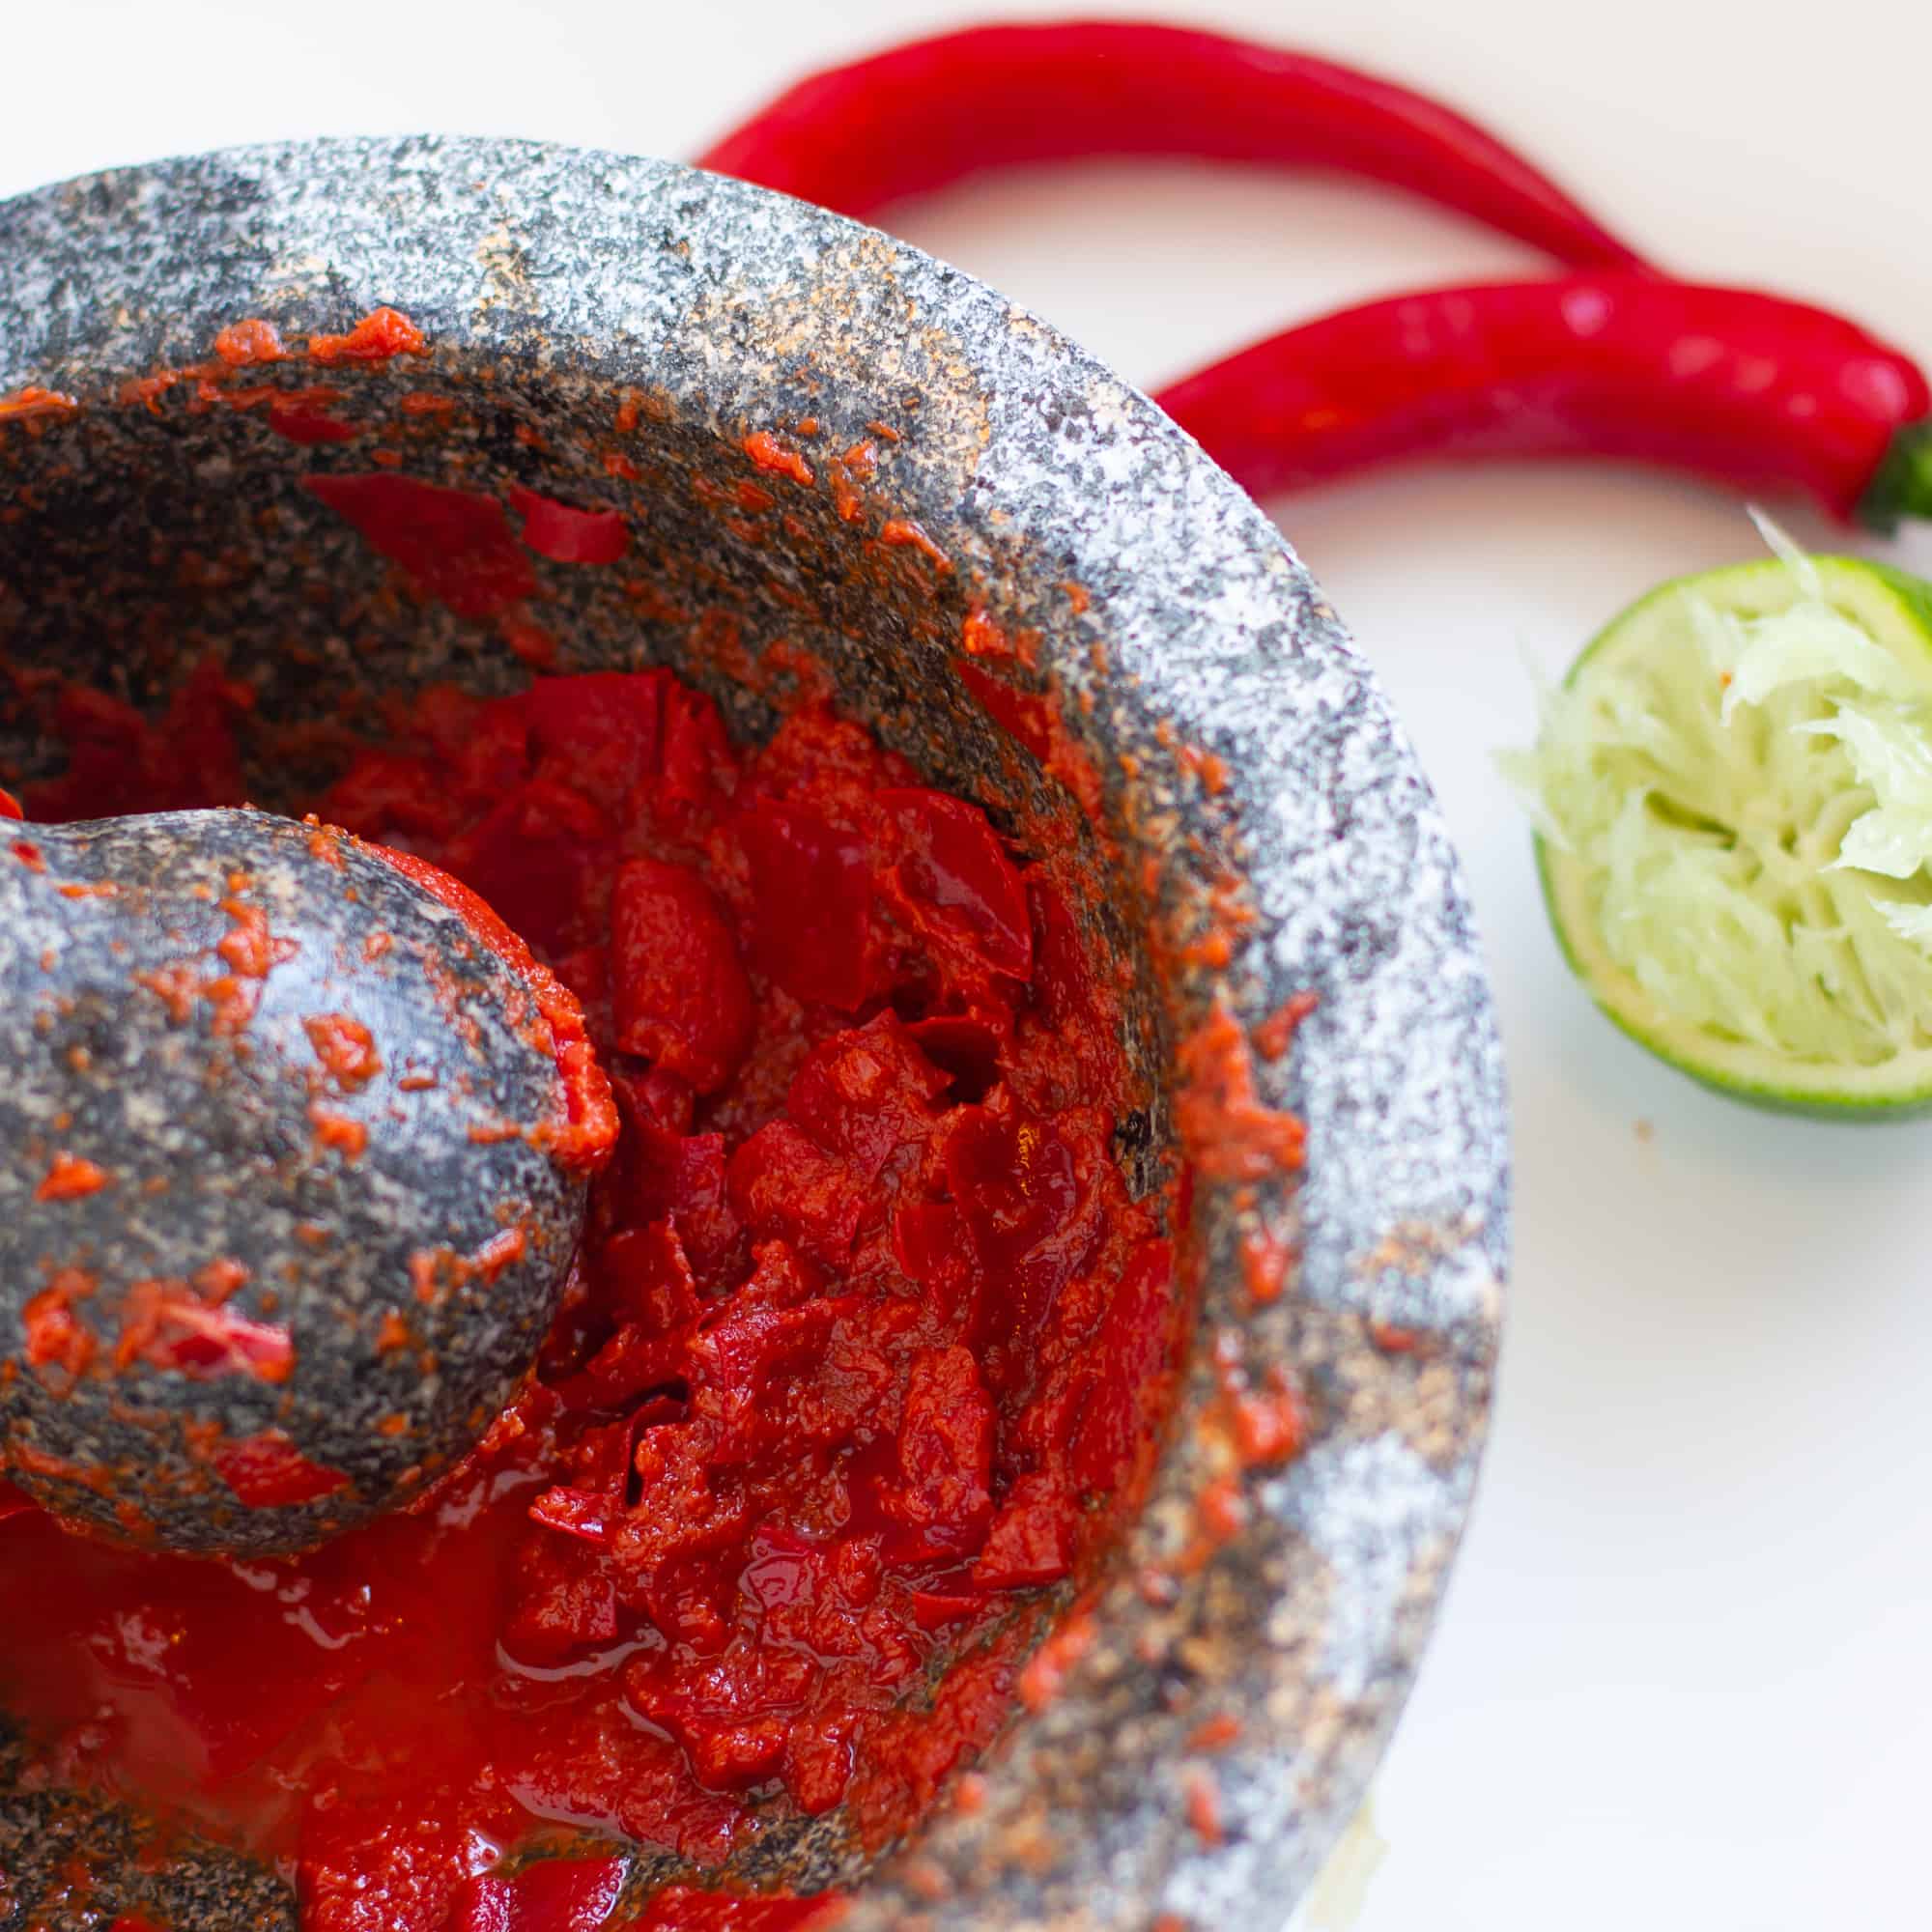 Easy instructions for how to make sambal oelek homemade from scratch using fresh red chili pepers, lime juice and salt.